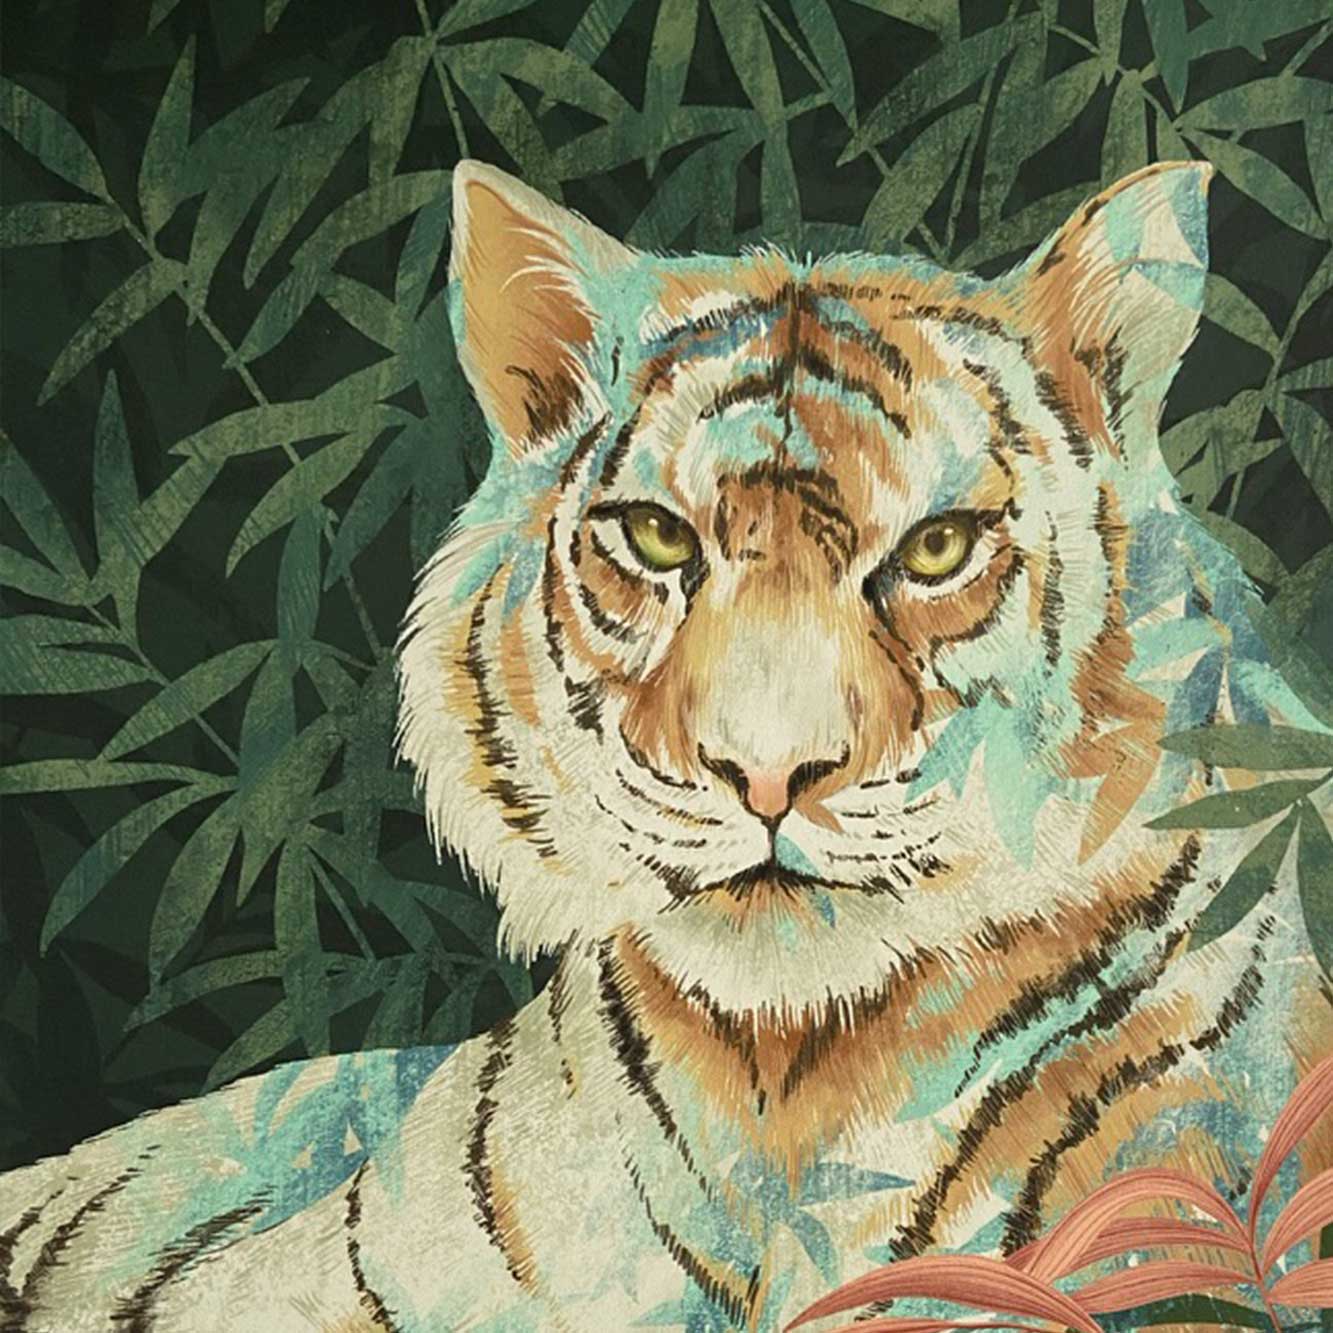 Detail Tiger Art Print by artist Chris Chun to raise funds for ARIEL projects in ASEAN animal law